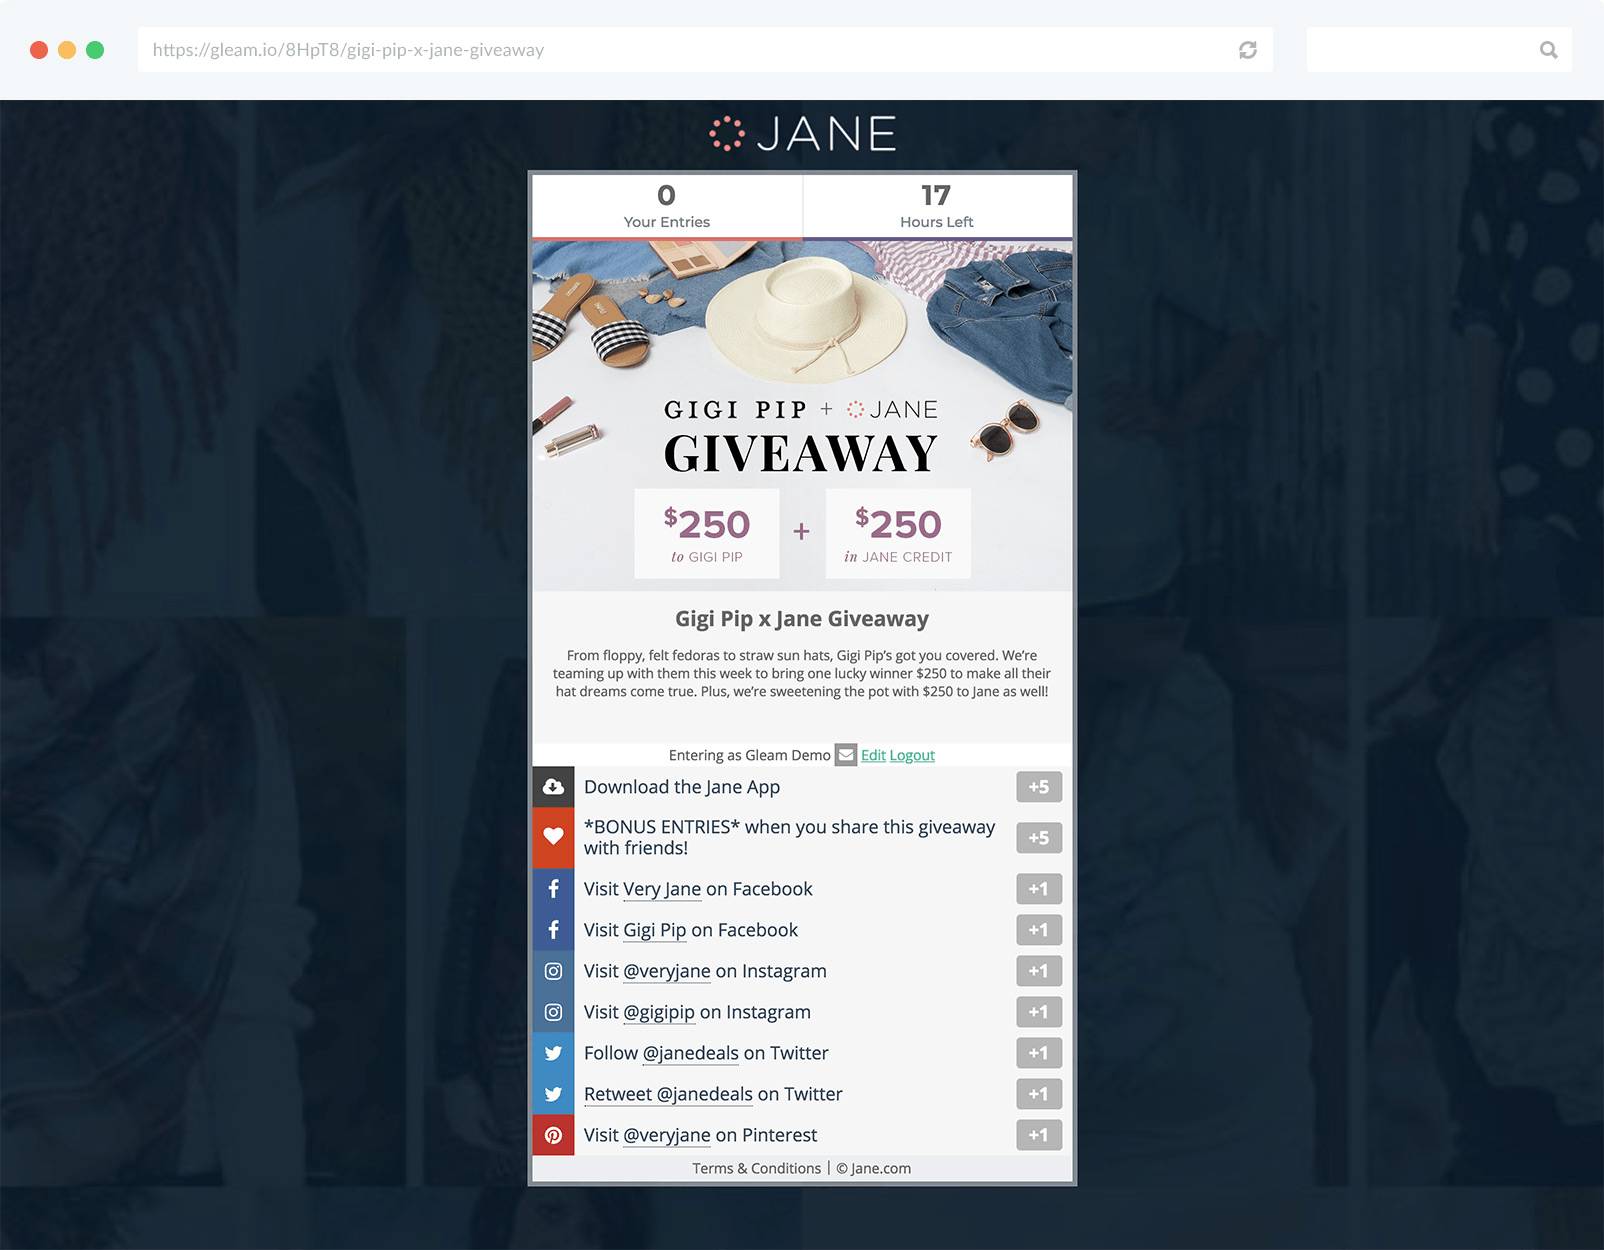 Custom hosted landing page for a Gleam giveaway campaign